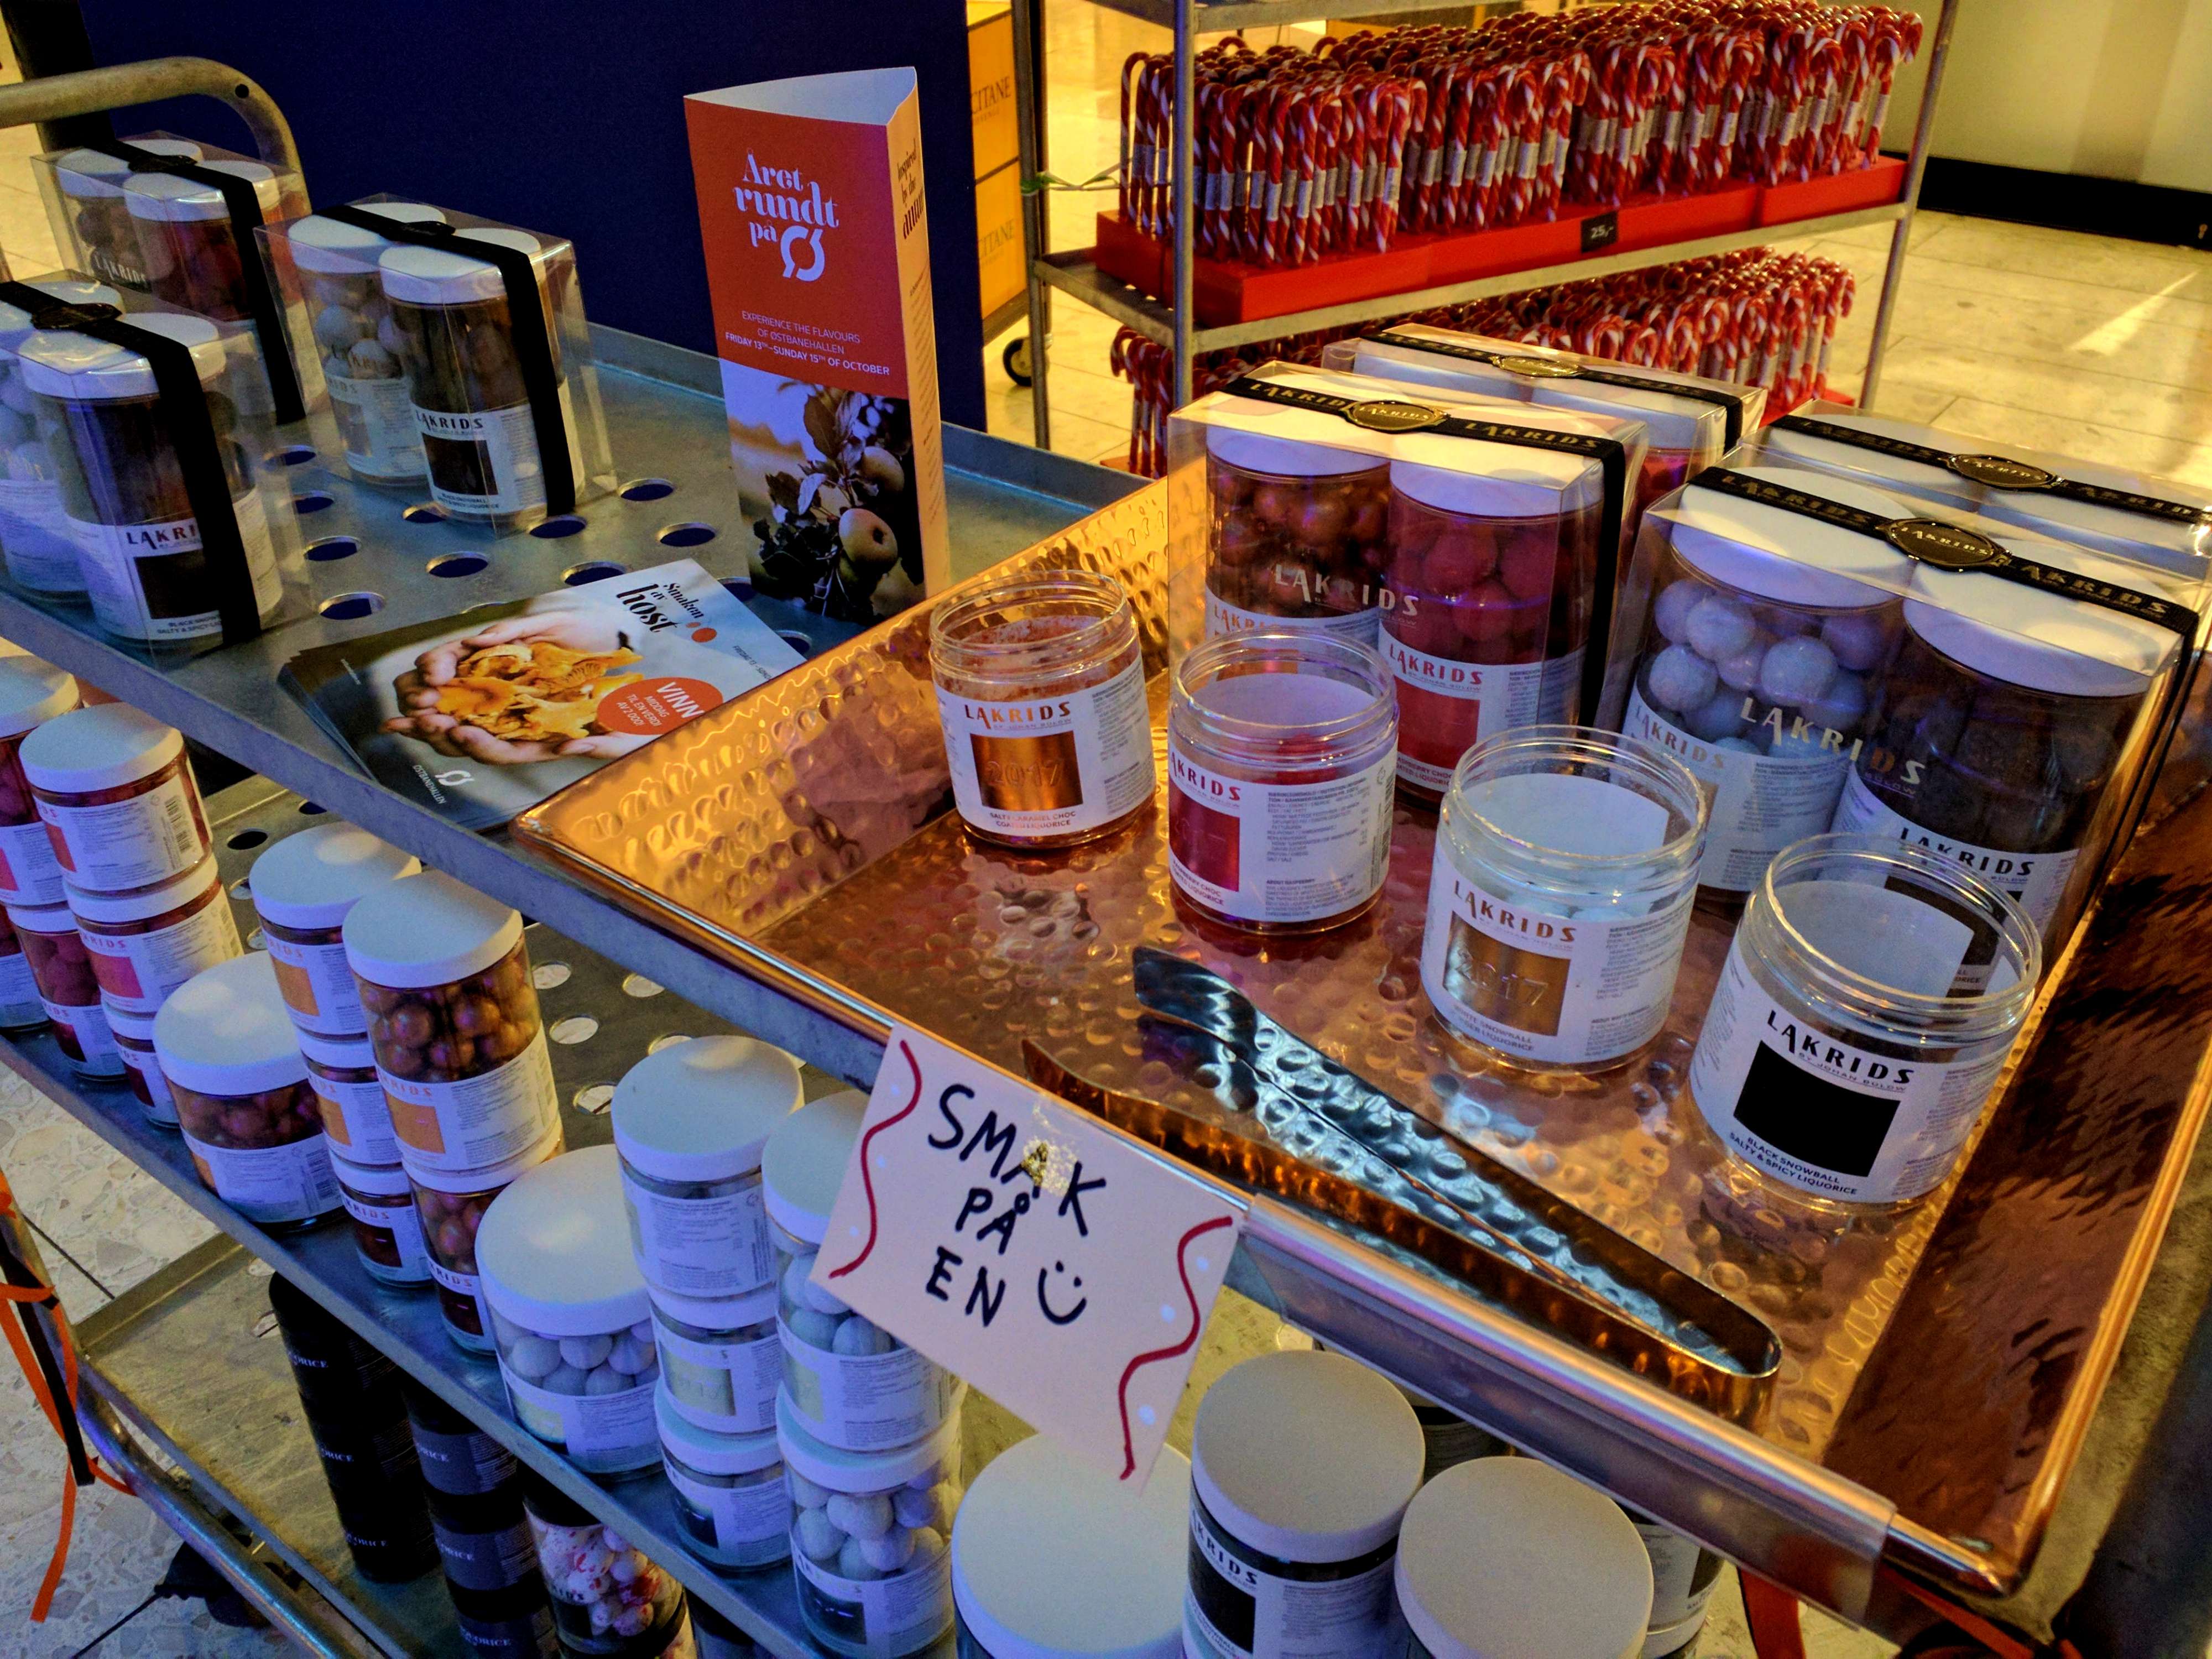 A selection of chocolate goods sold at Dropsen